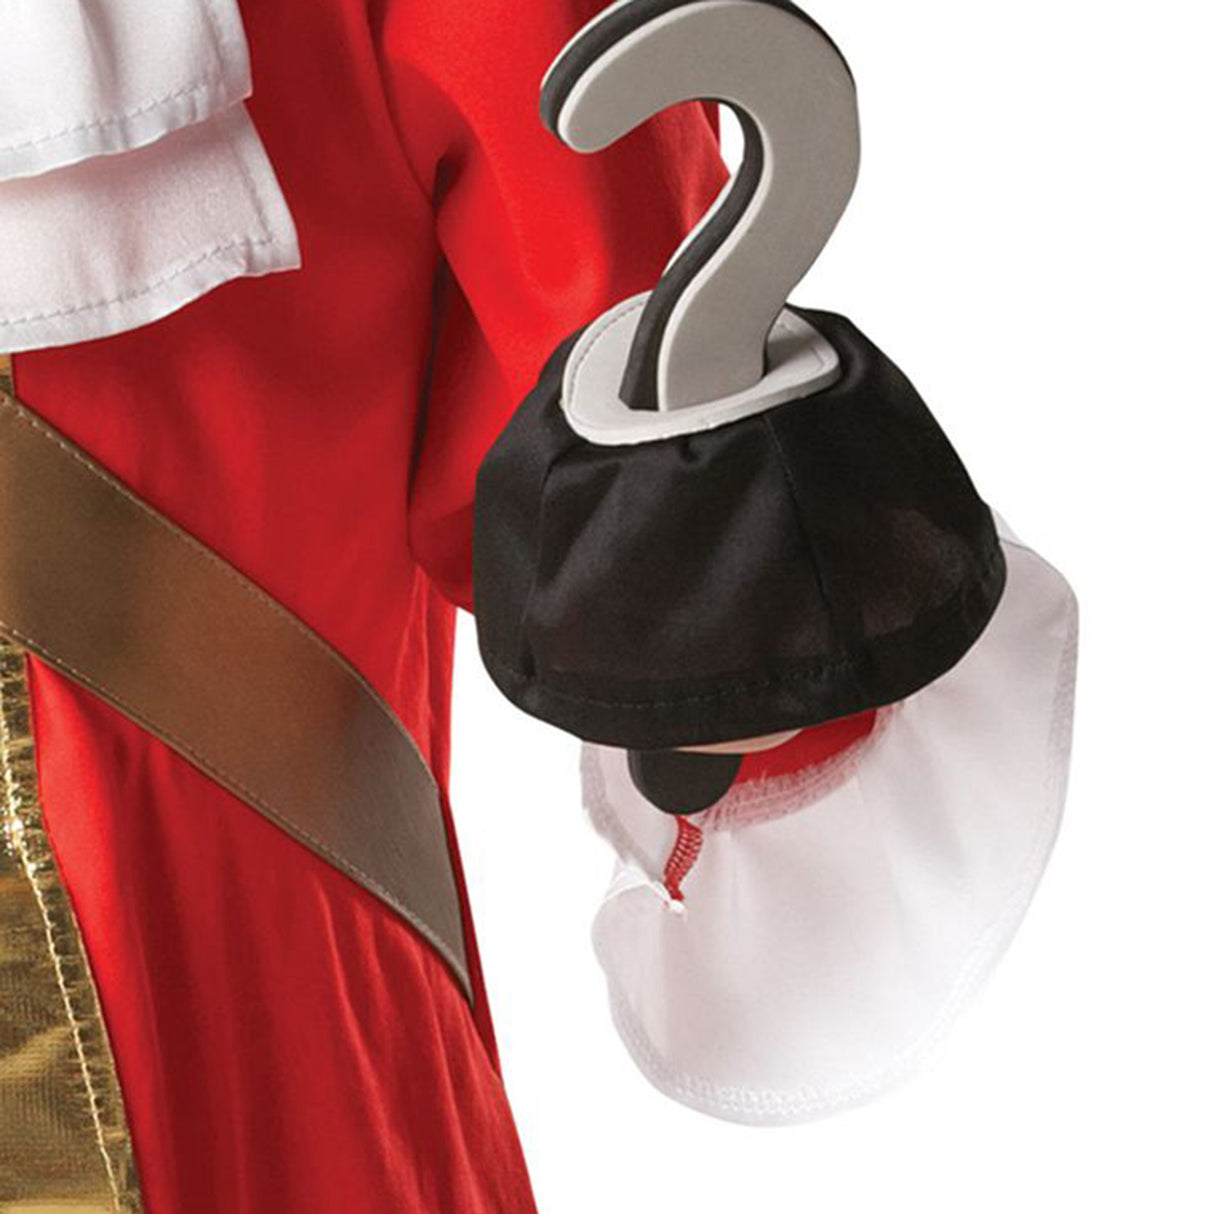 Rubies Captain Hook Child Costume, Red (7-8 years)